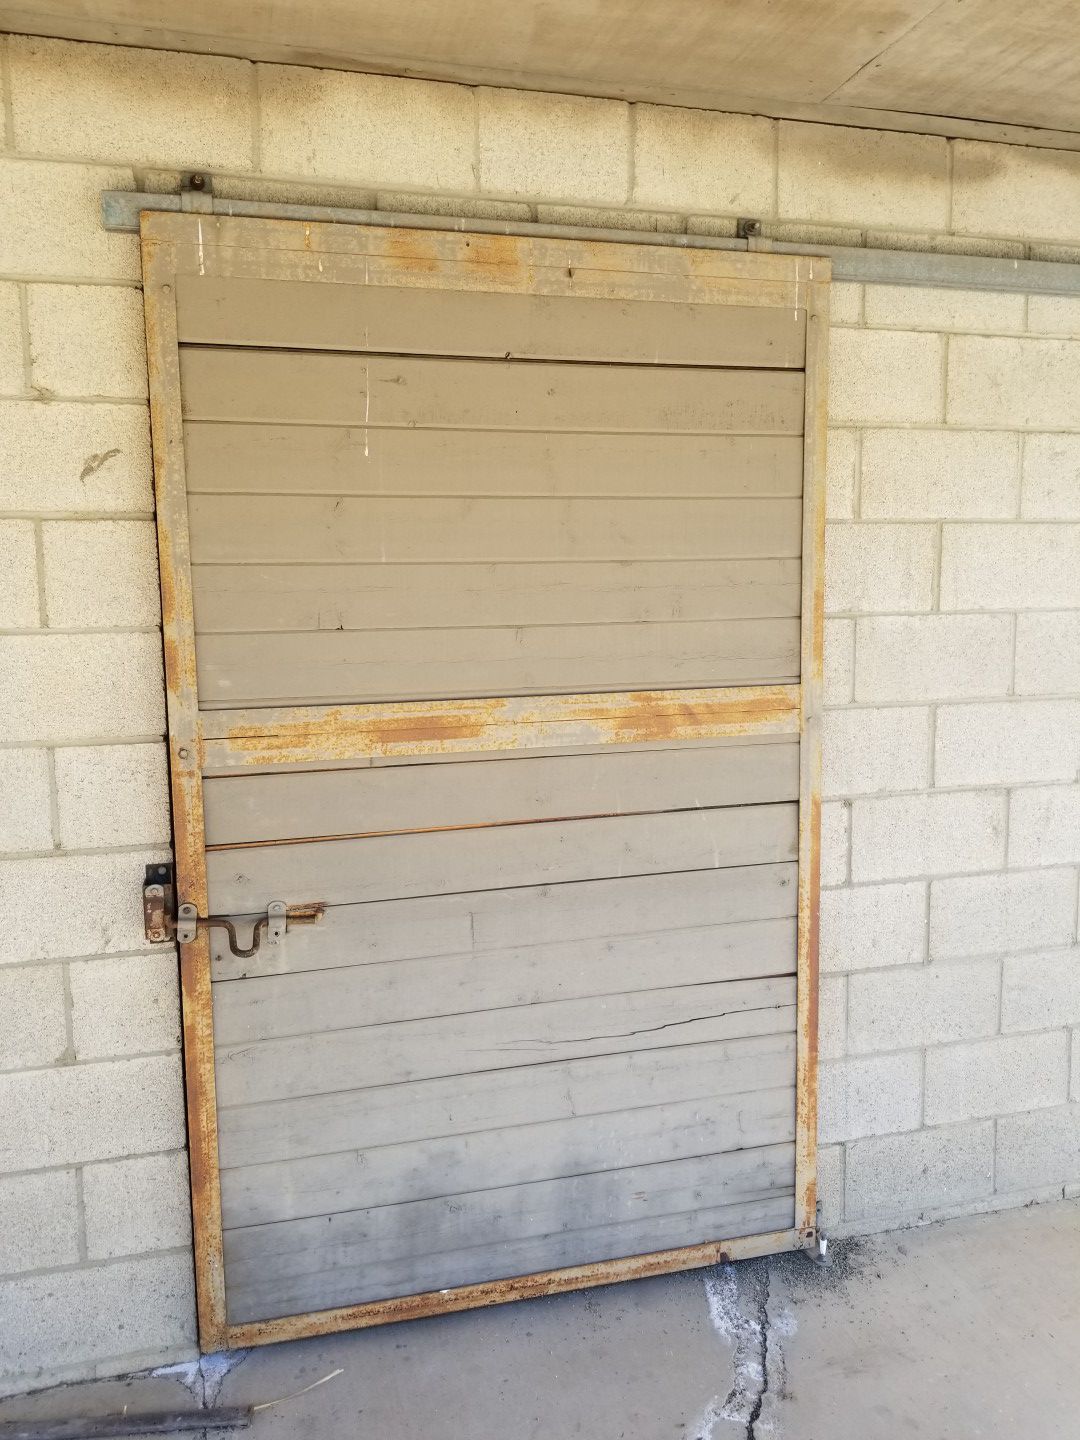 Barn or horse stable doors